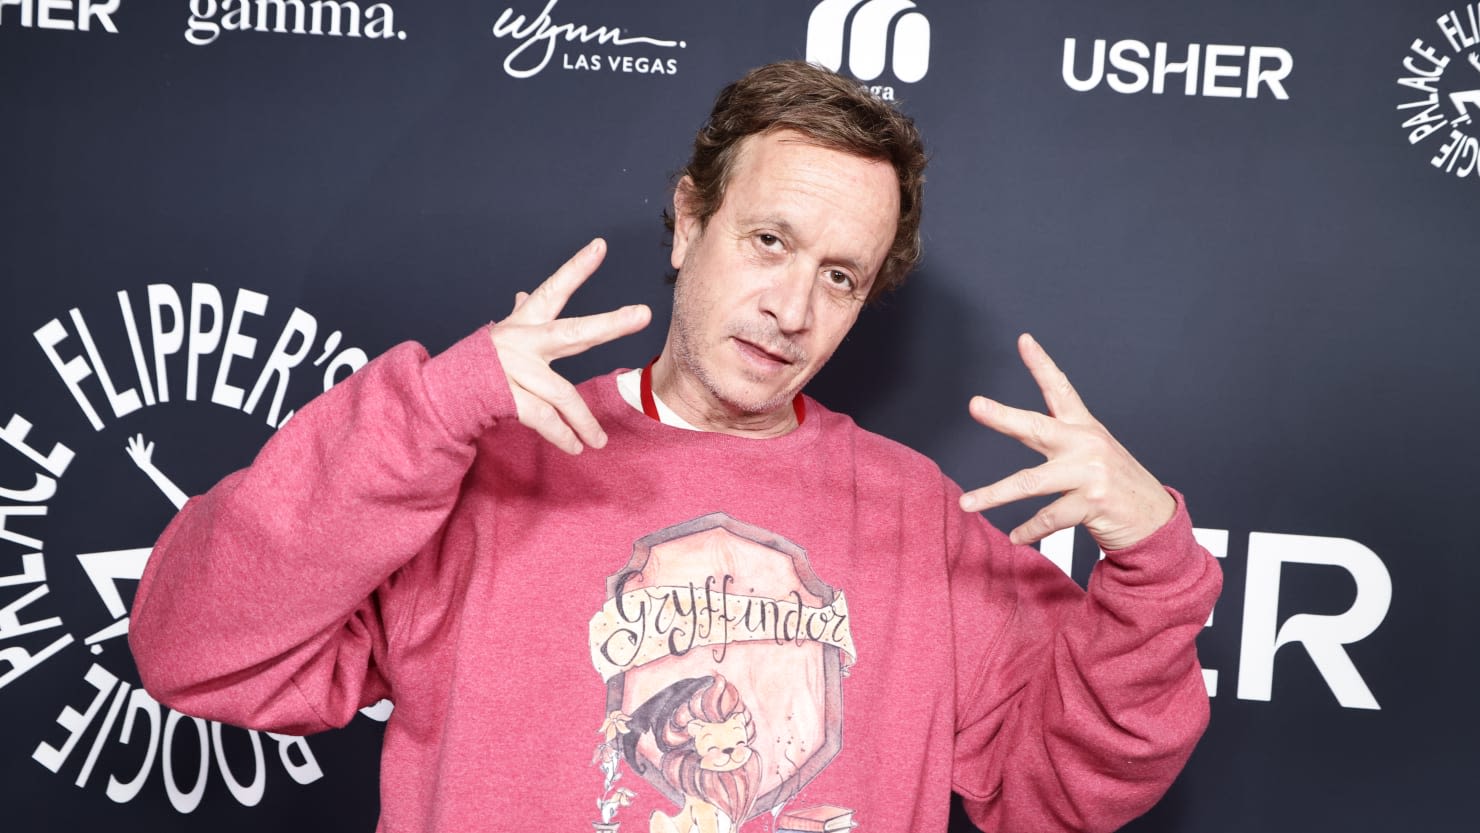 Pauly Shore Says Richard Simmons Biopic Is Happening ‘Whether He Likes It Or Not’